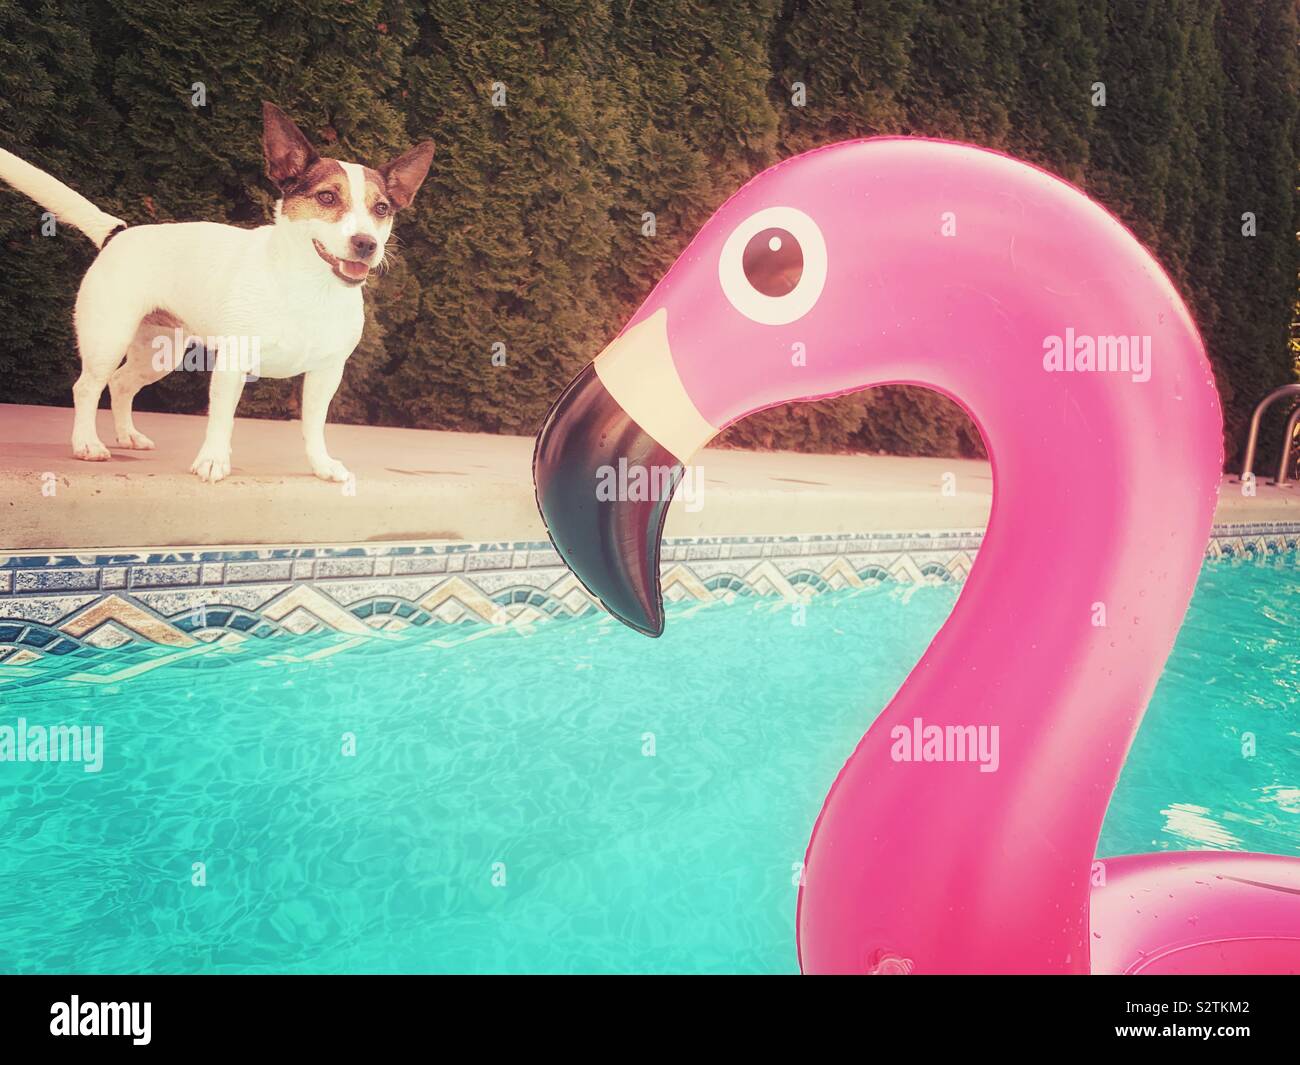 Happy dog standing poolside looking at inflatable pink flamingo toy floating in outdoor swimming pool. Stock Photo